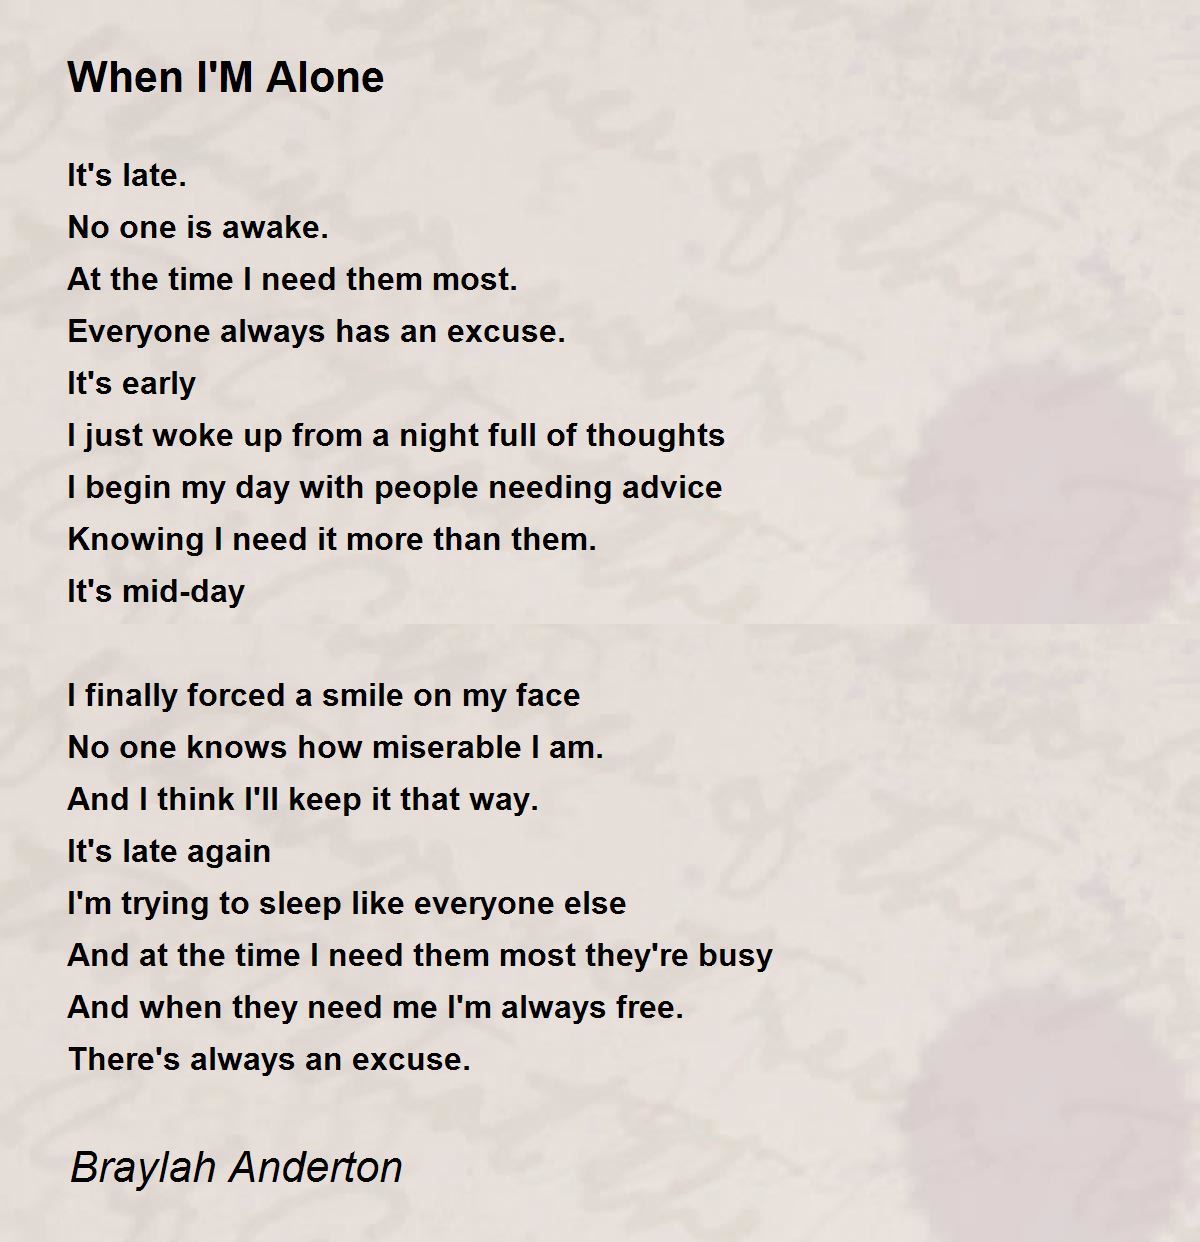 When I'M Alone - When I'M Alone Poem by Braylah Anderton